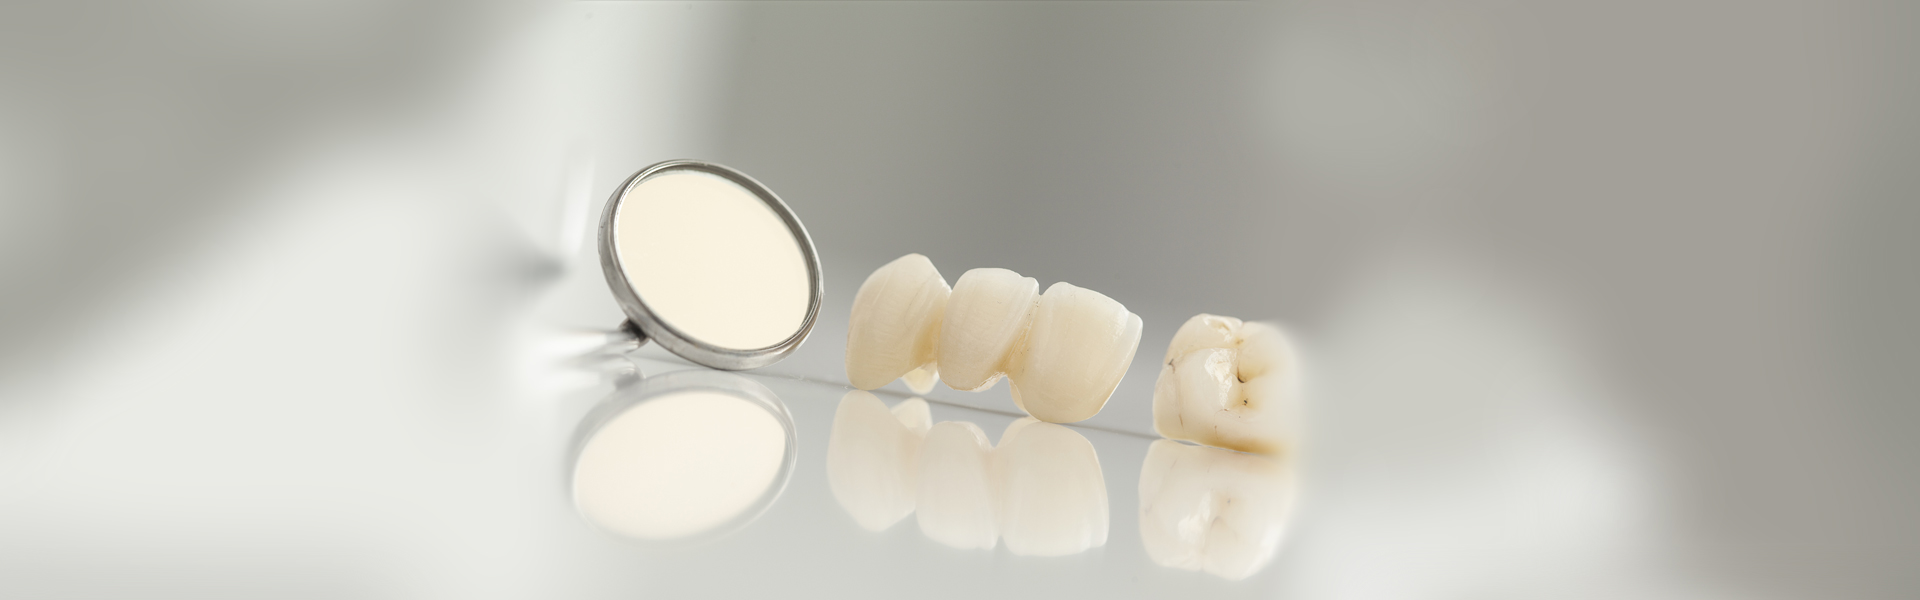 Your Smile Impacted by Discolored or Cracked Teeth: Transform It Using Dental Crowns